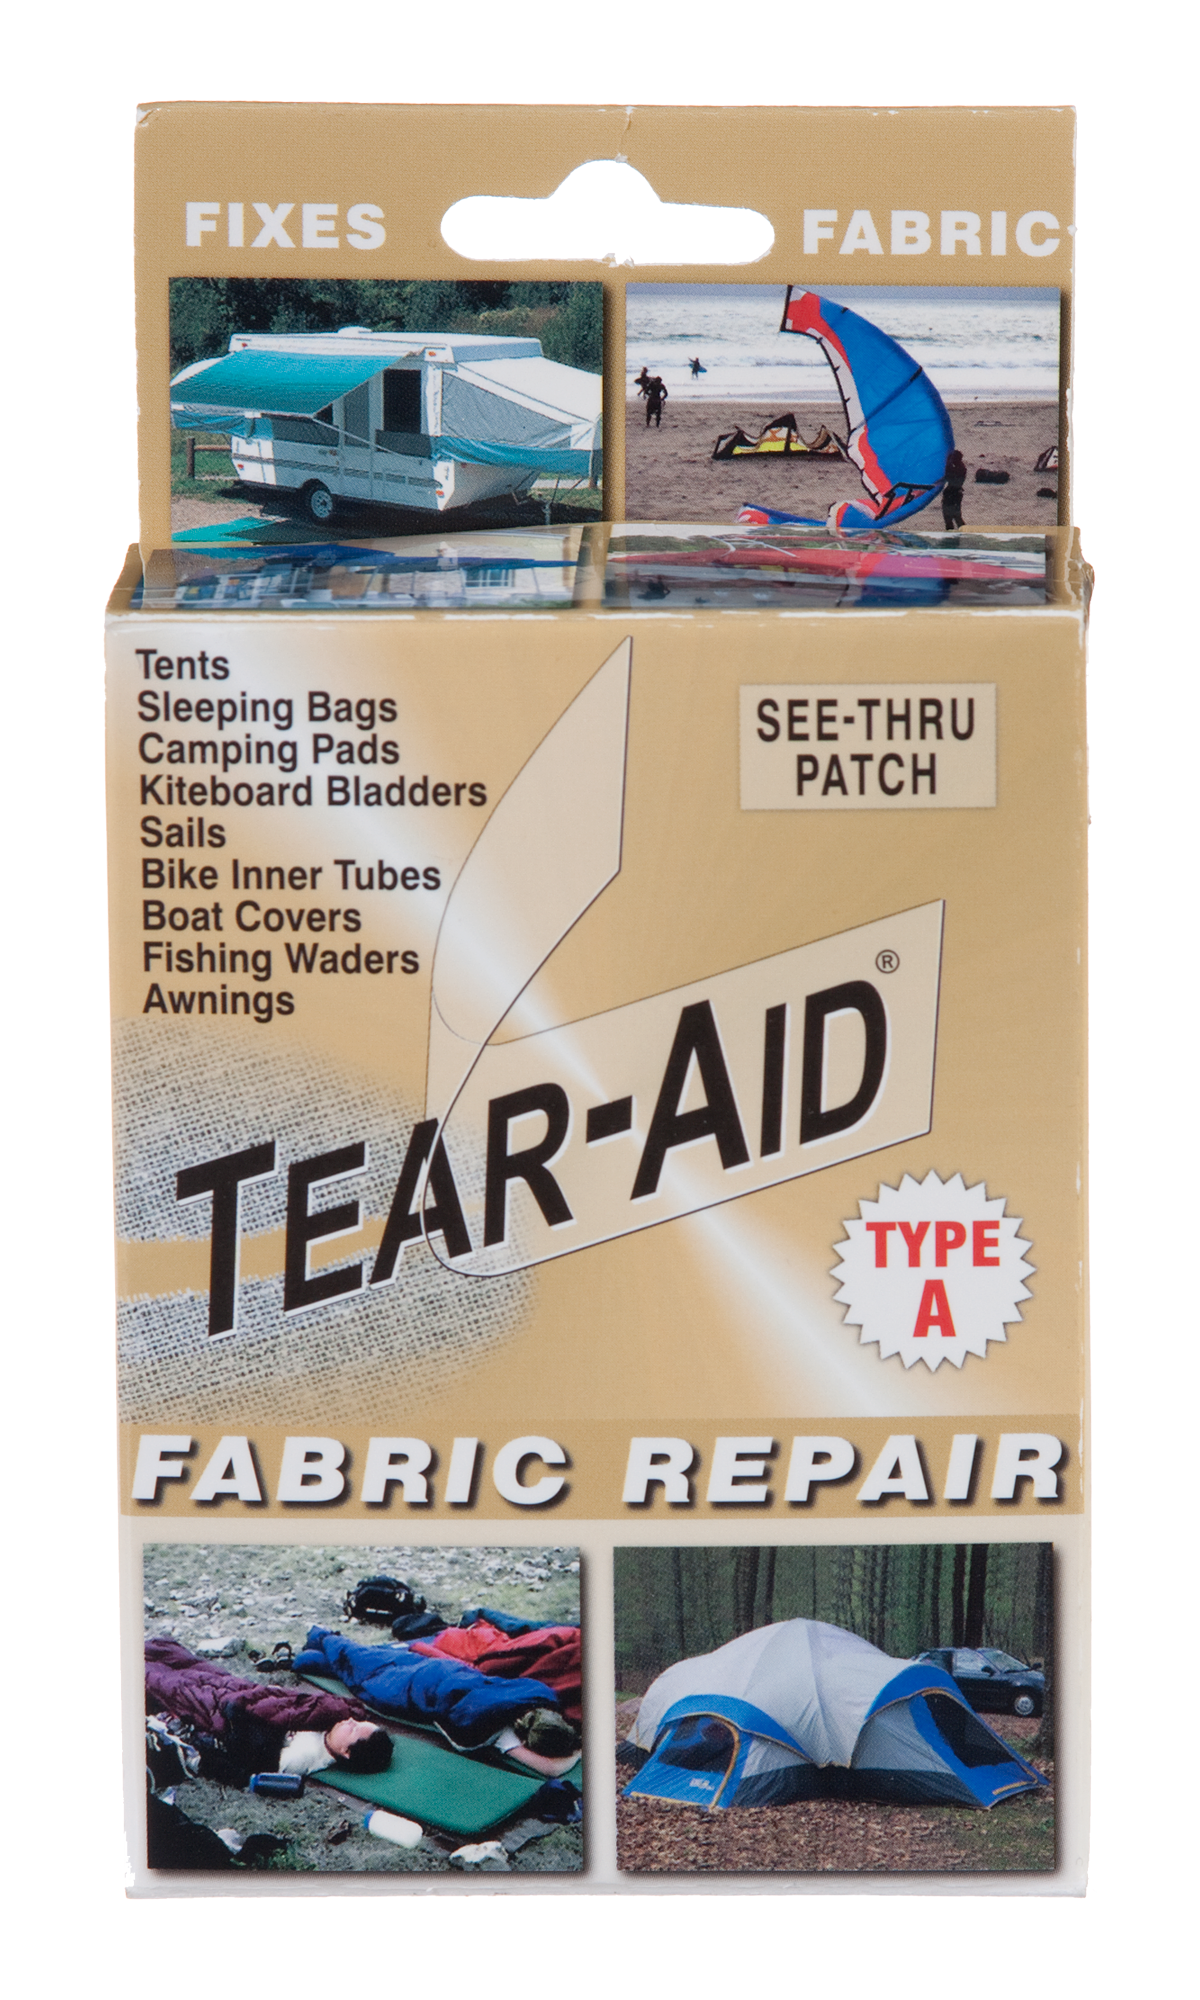 Canvas Tear-Aid, Tent Care, Tent Accessories